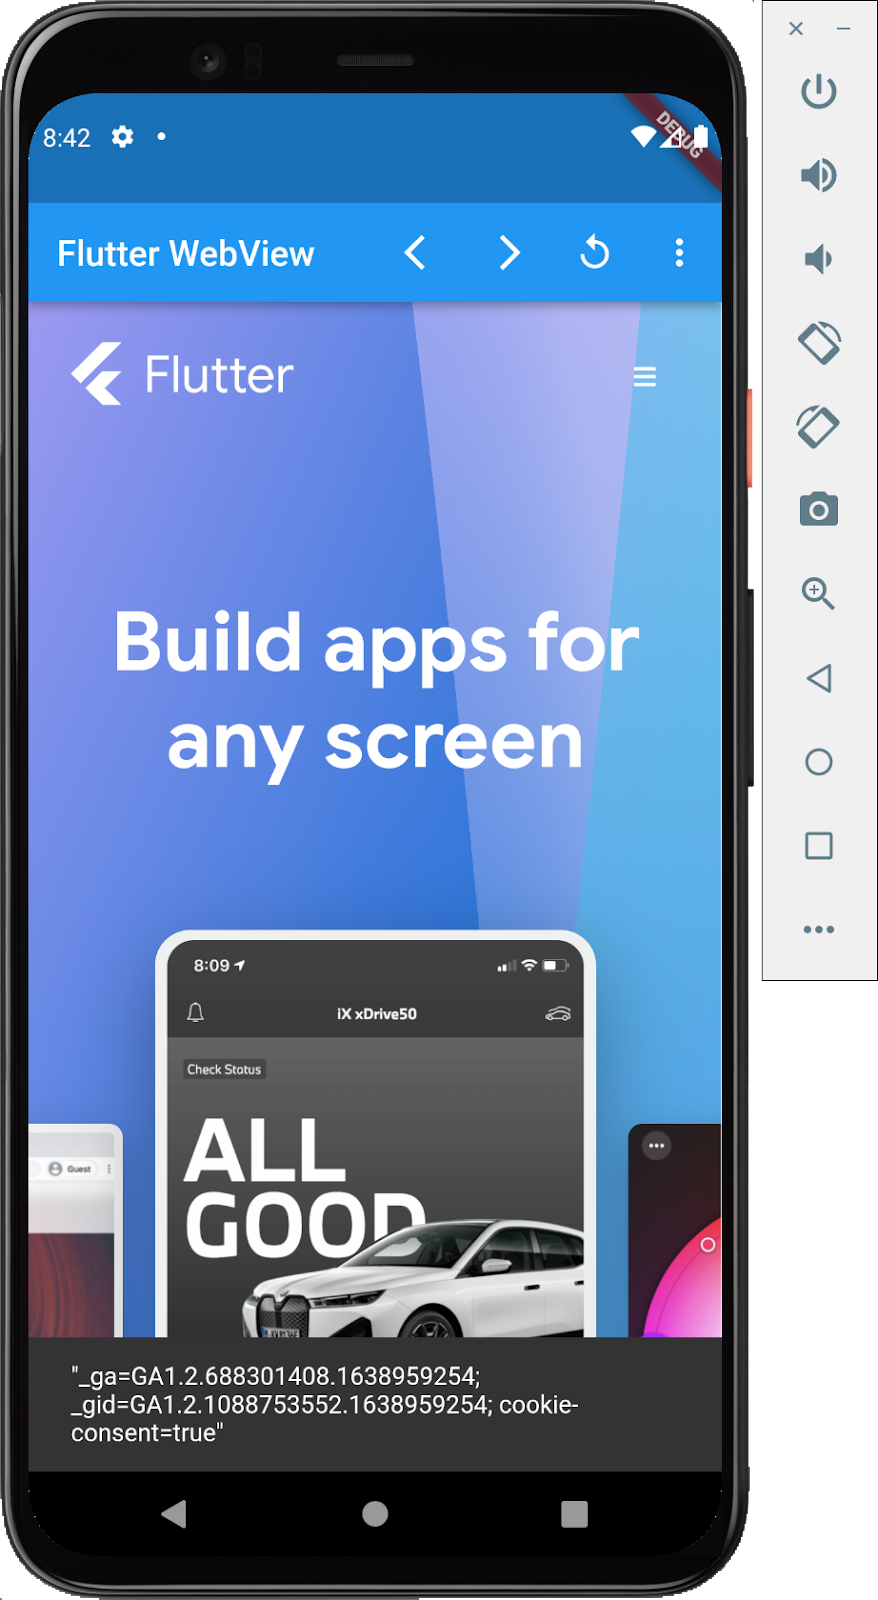 A screen shot of an Android emulator running a Flutter app with an embedded webview showing the Flutter.dev homepage with a toast popup showing the cookies set in the browser